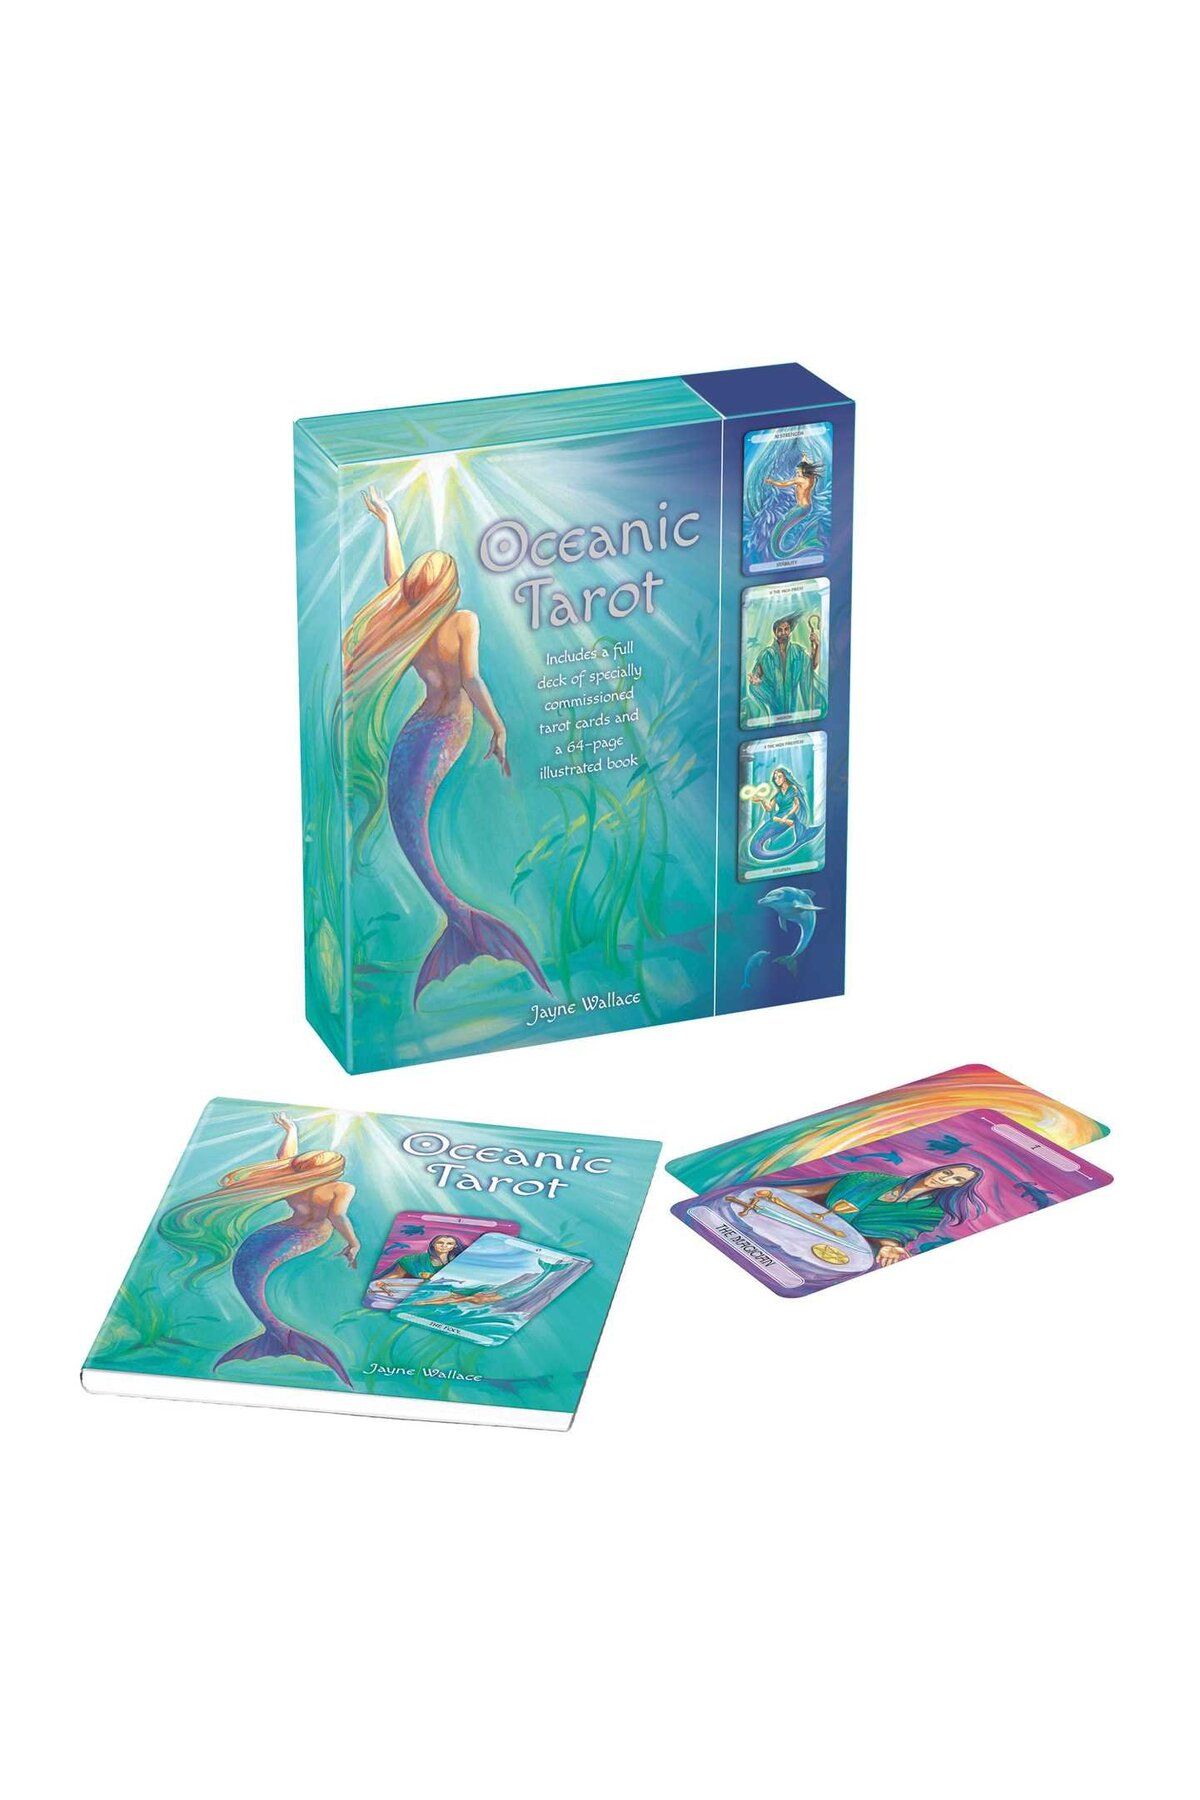 AnkaKitabevi Oceanic Tarot: Includes A Full Desk Of Specially Commissioned Tarot Cards And a 64-Page